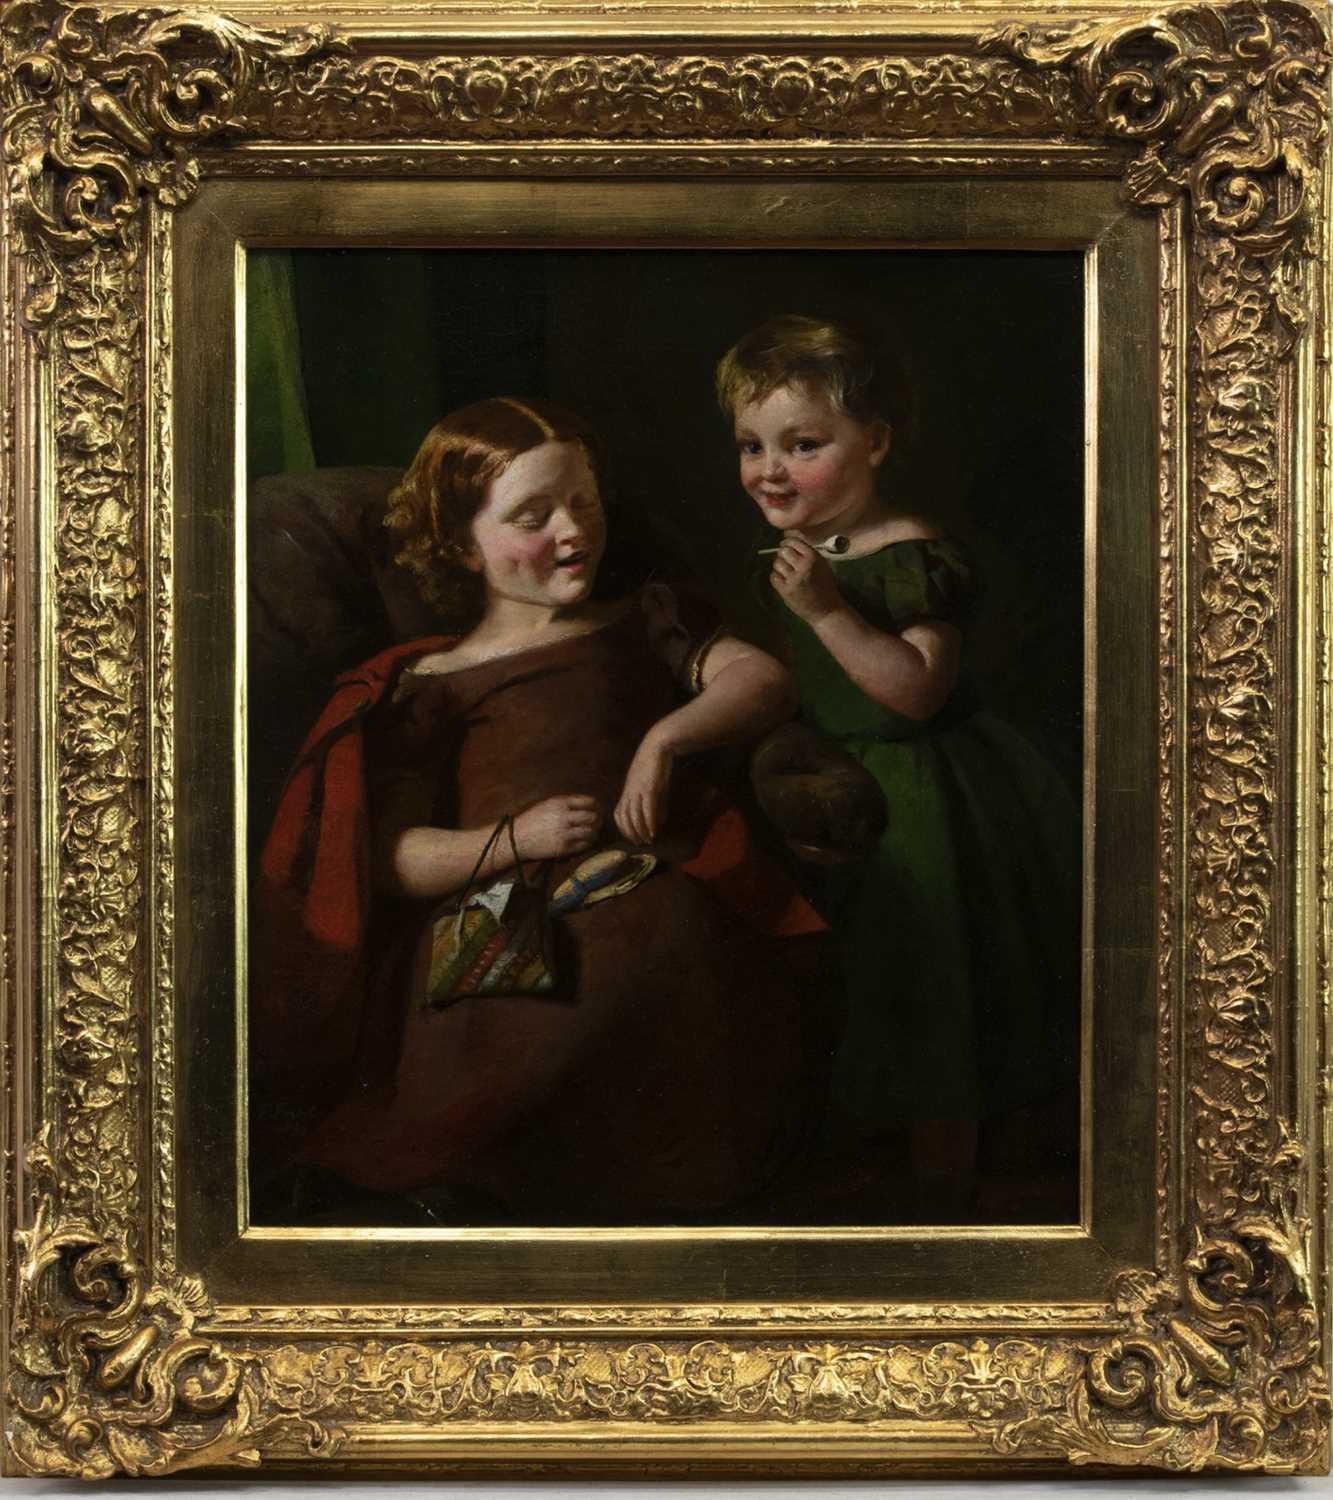 Lot 101 - TWO BAIRNS PLAYING, AN OIL BY THOMAS FAED